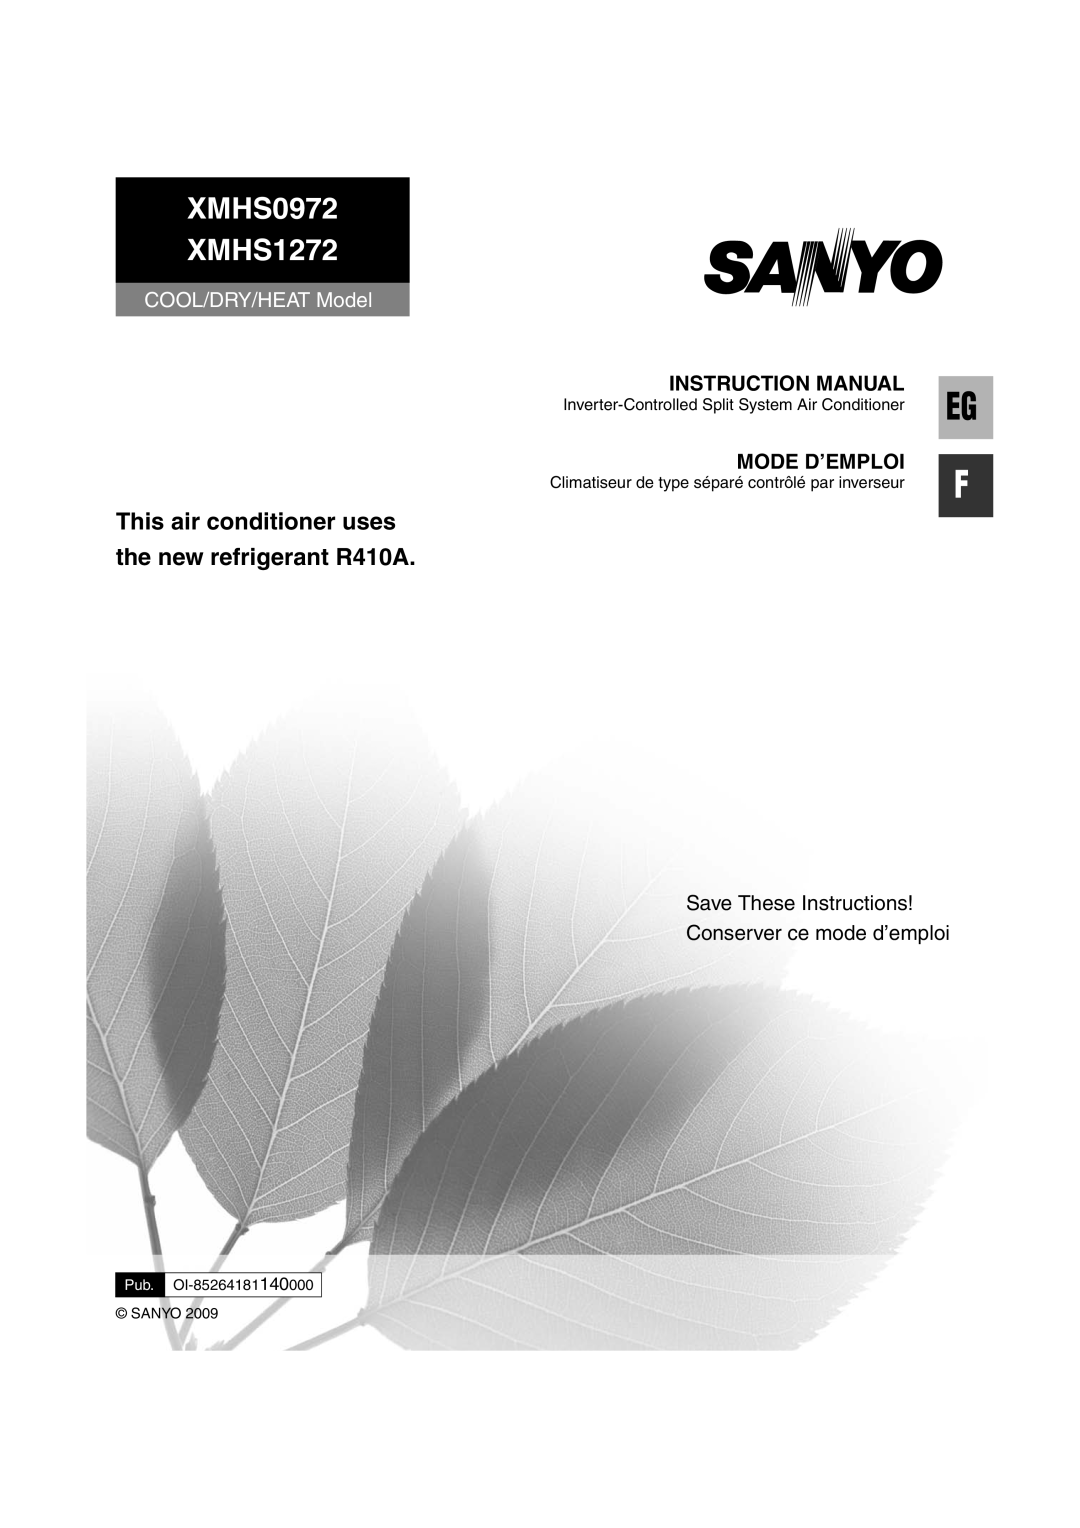 Sanyo XMHS0972 XMHS1272, This air conditioner uses, the new refrigerant R410A, COOL/DRY/HEAT Model, Instruction Manual 